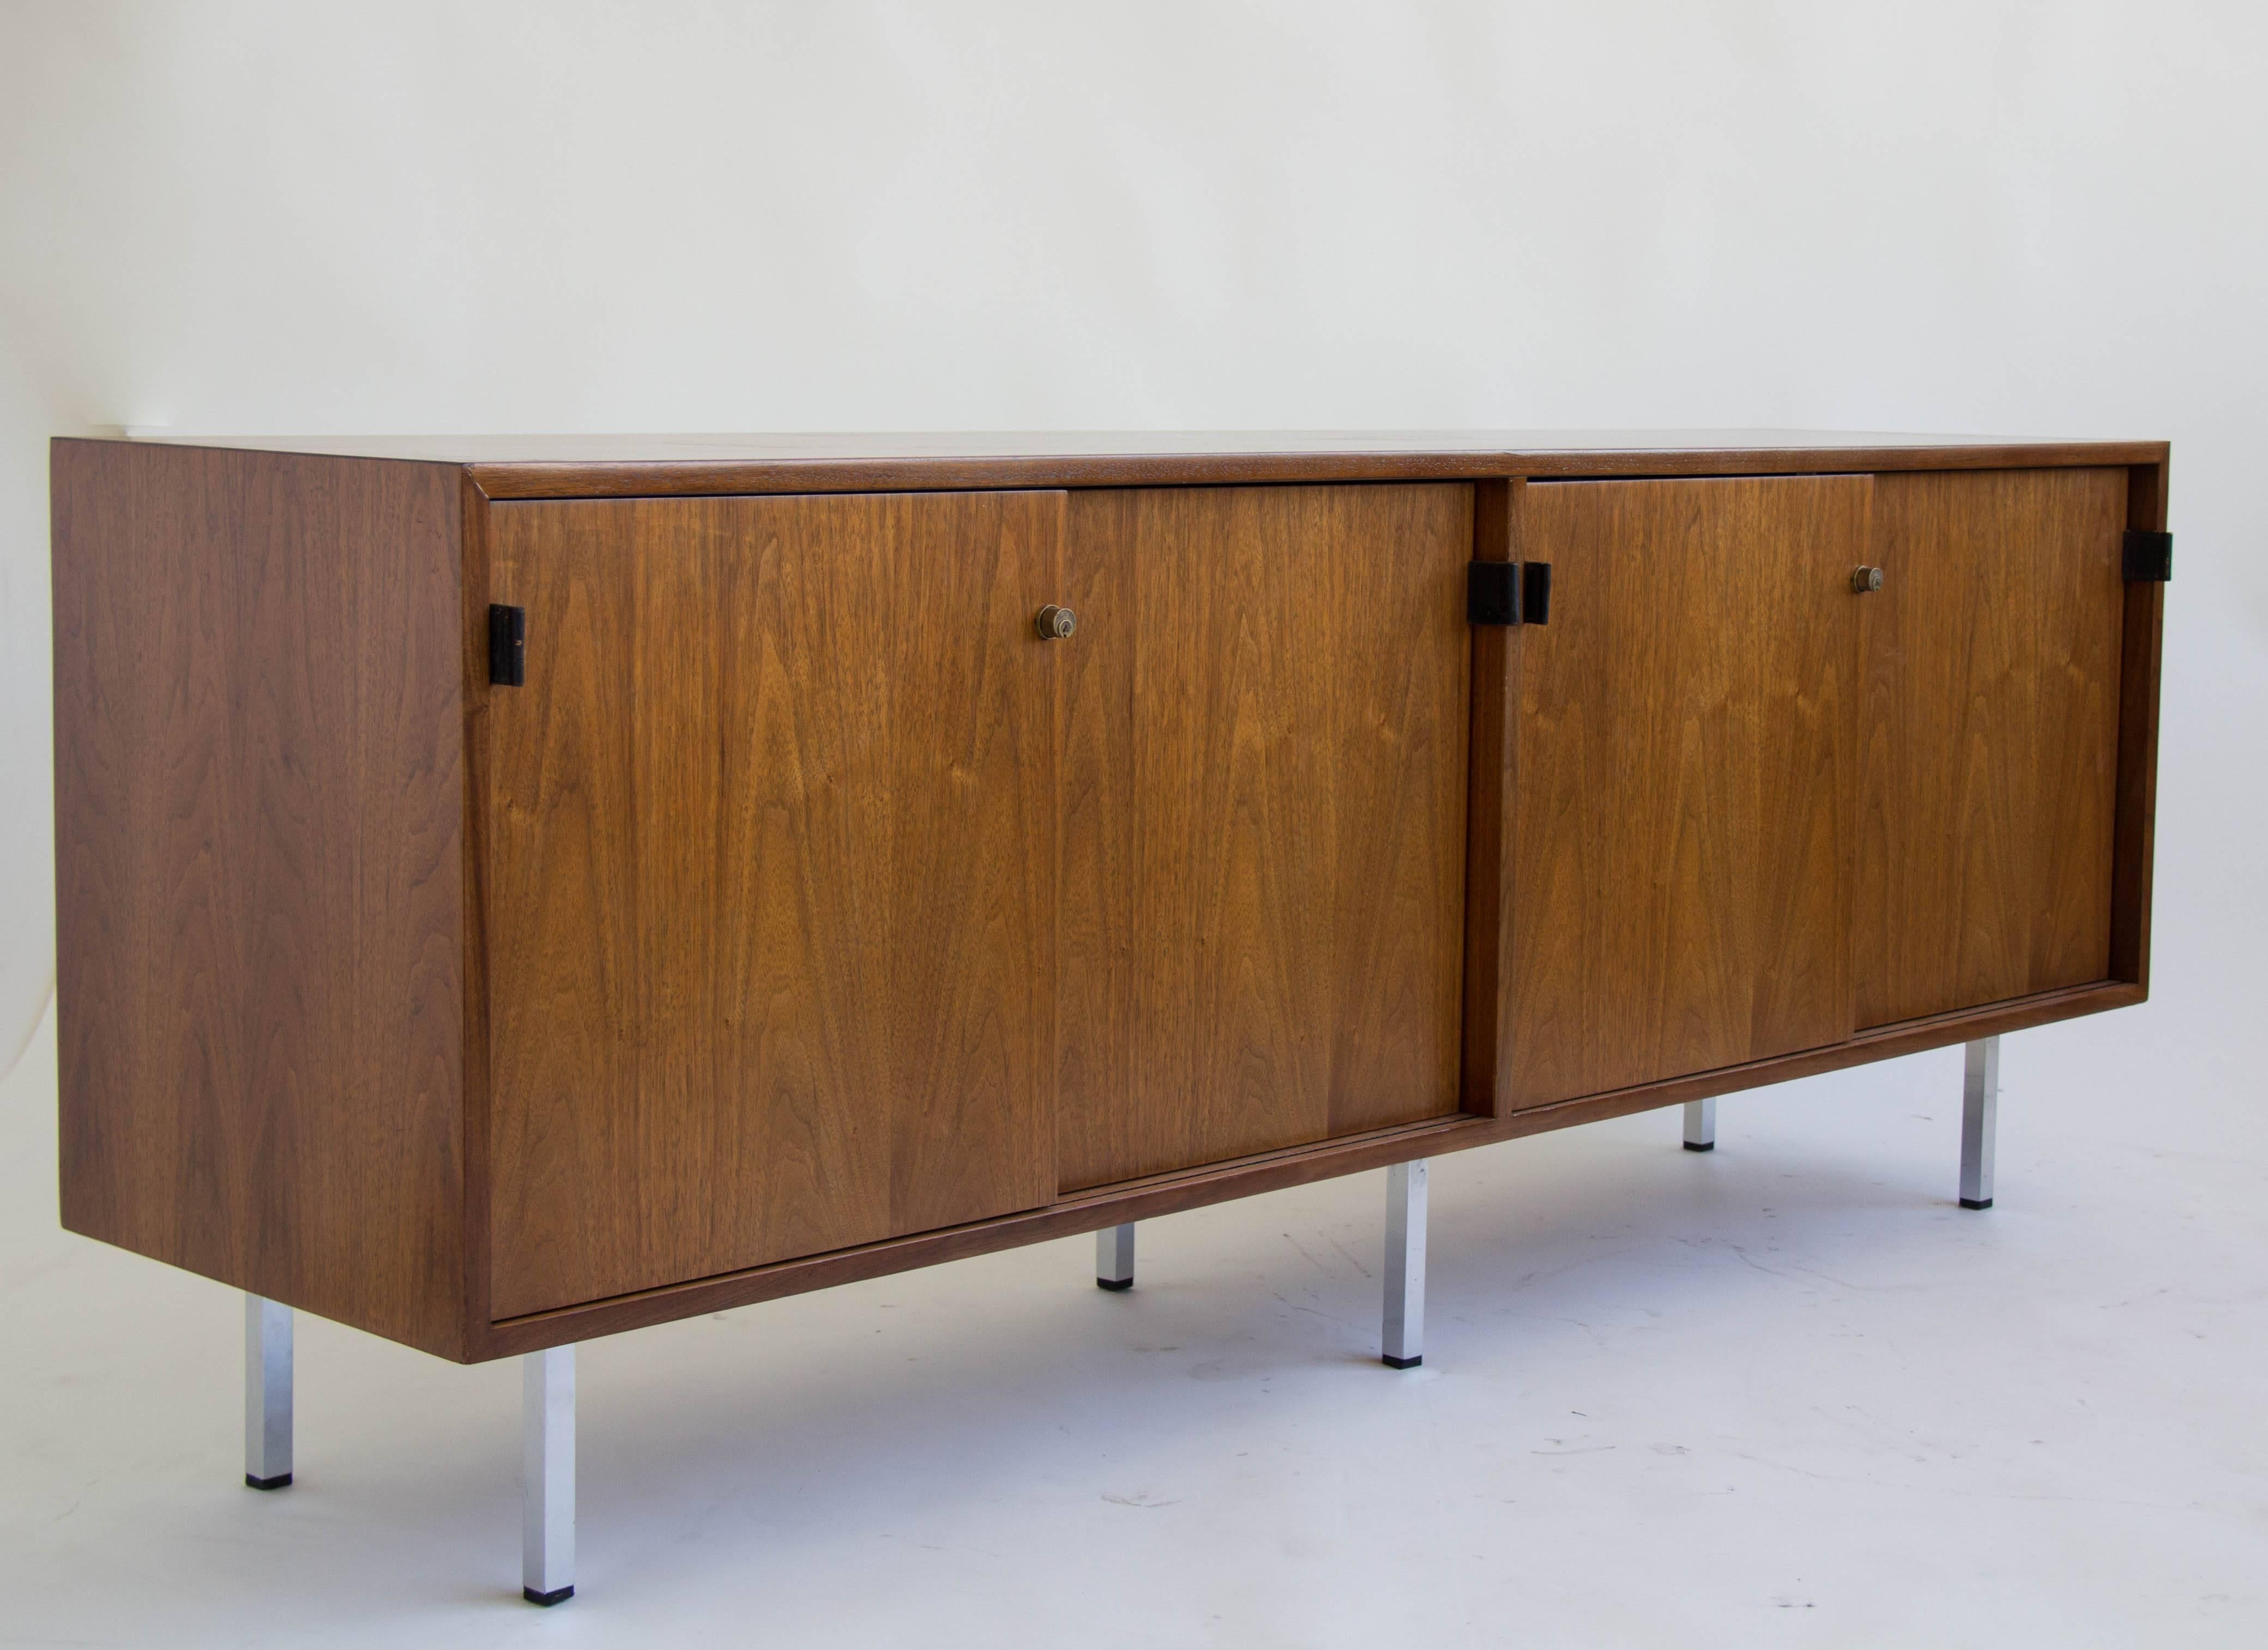 Four-compartment credenza by Florence Knoll. Each compartment has an adjustable shelf and closes with sliding doors. Two locks secure the compartments if necessary. The flat drawer pulls are made of top-stitched black leather. The credenza is